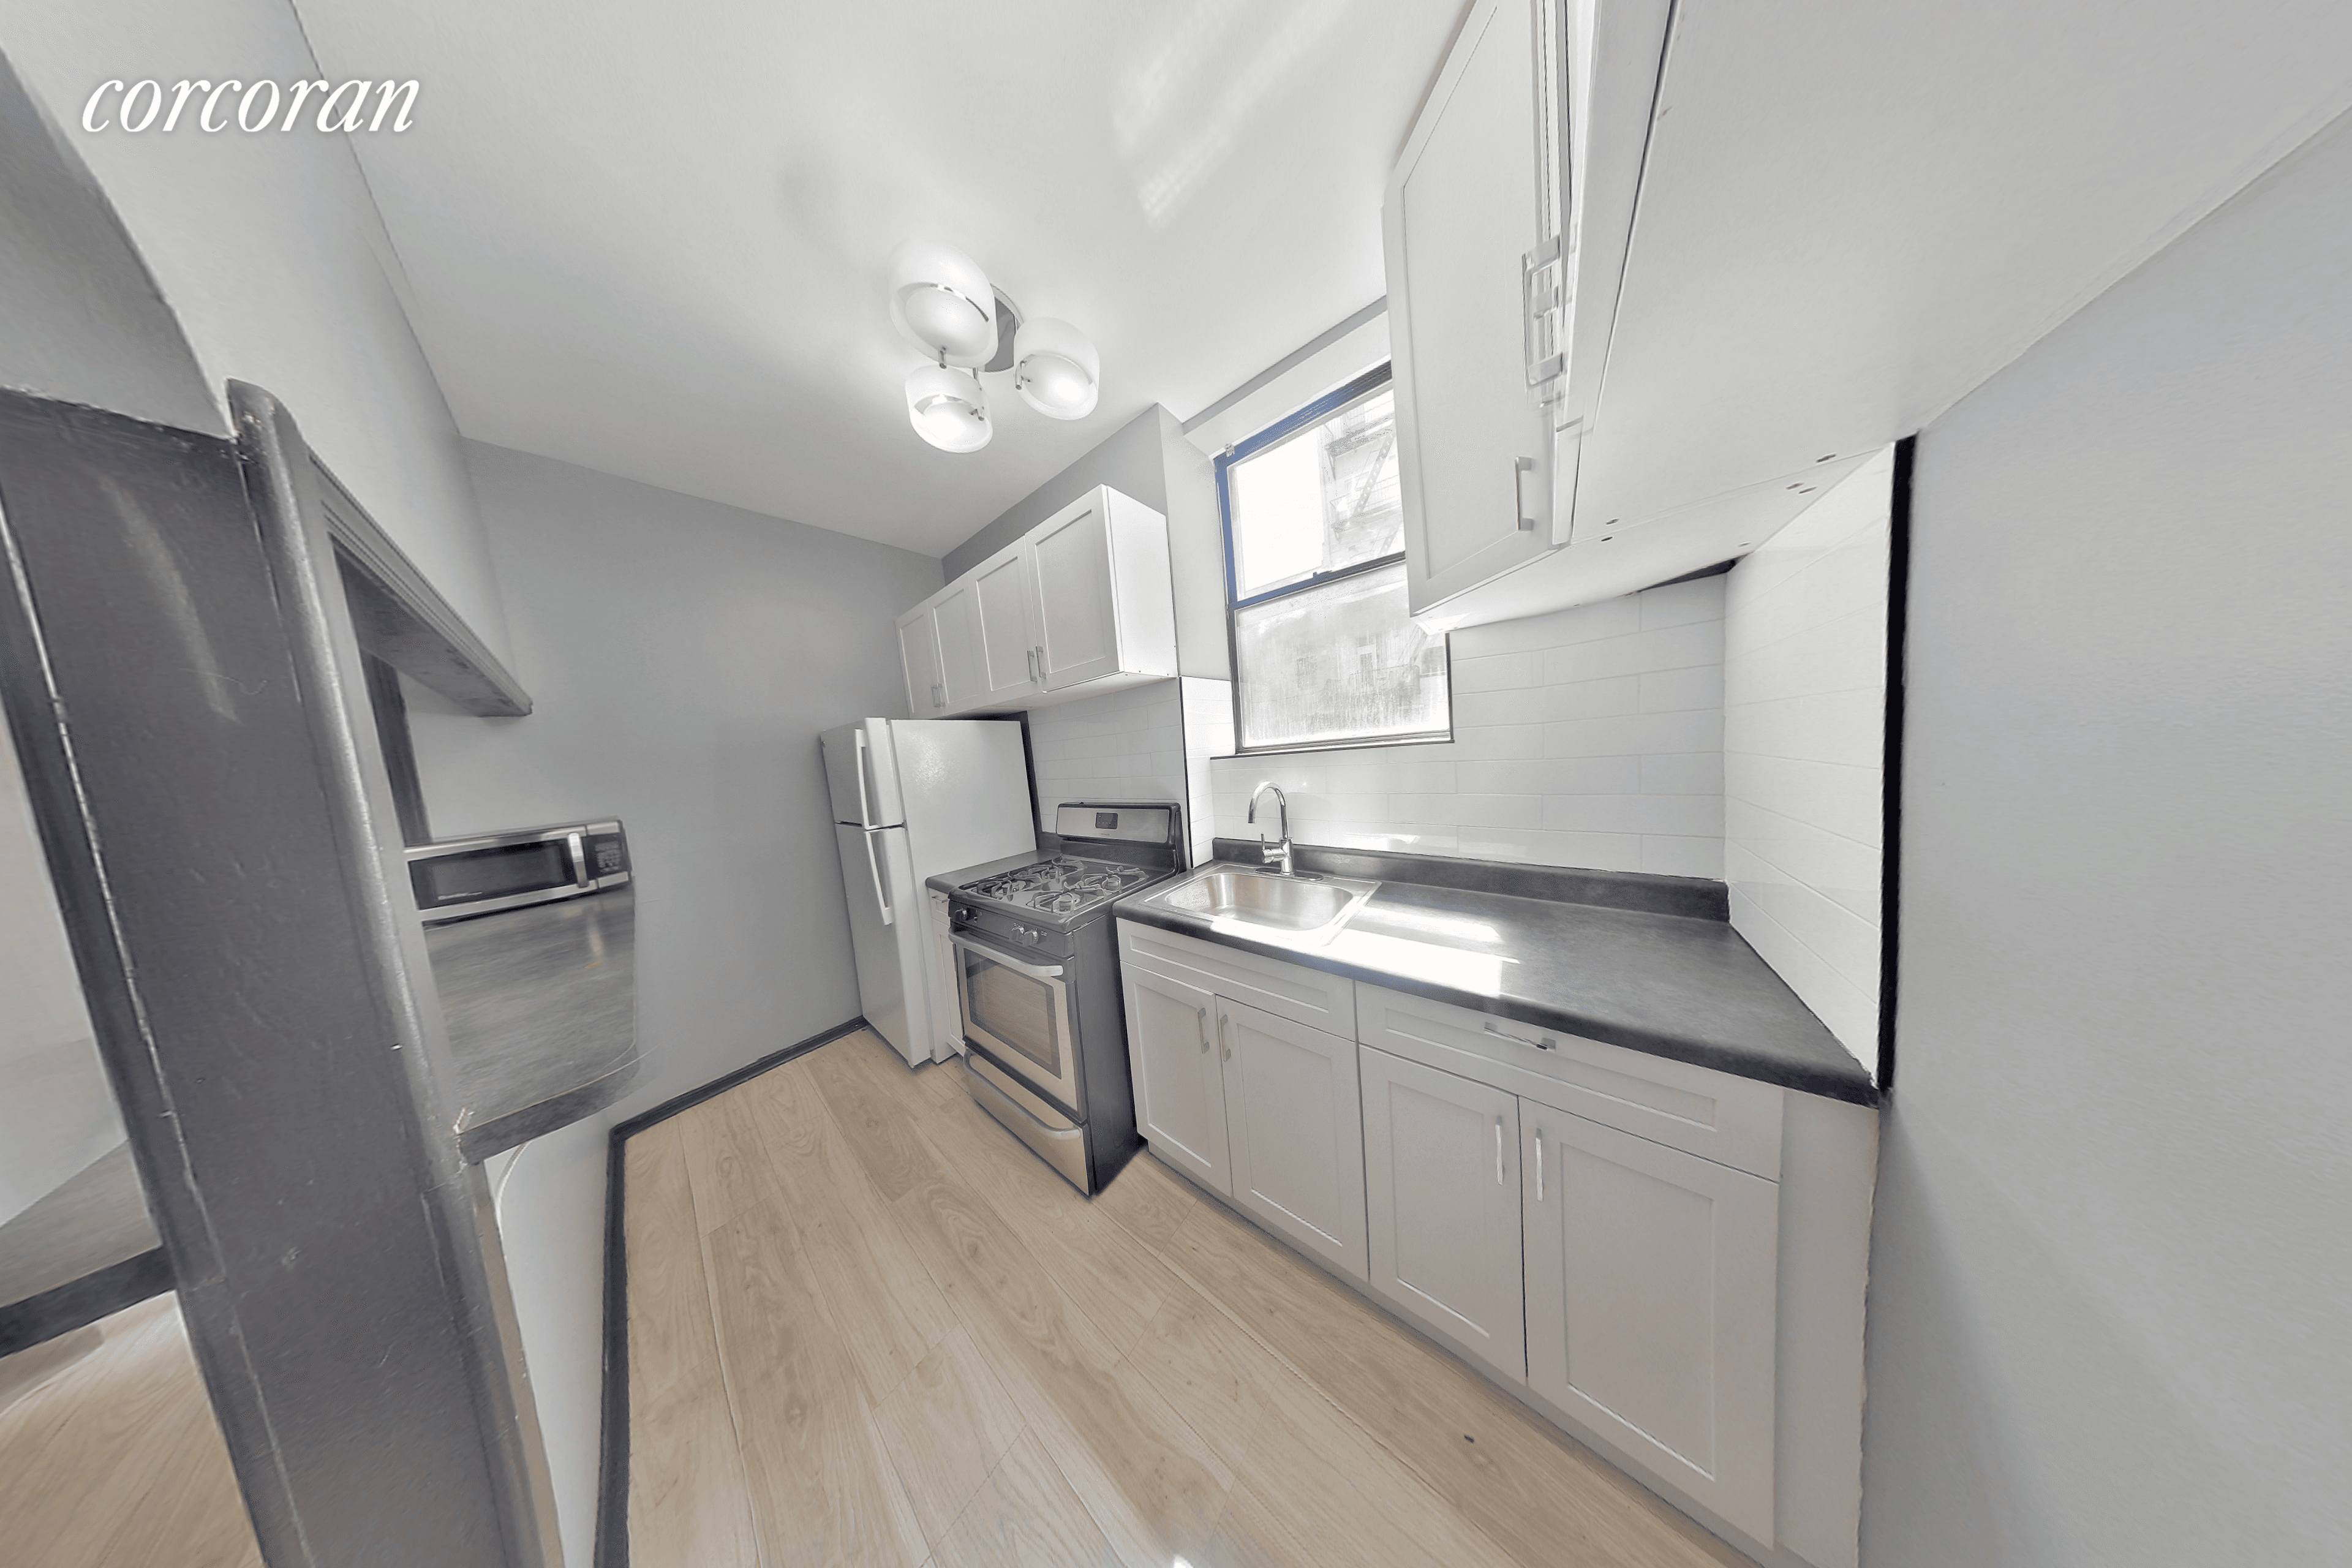 Spacious 5 Bedroom, 2 Bath Apartment in Williamsburg This massive first floor, 5 bedroom apartment in Williamsburg includes both large living and entertaining space including a large living room and ...